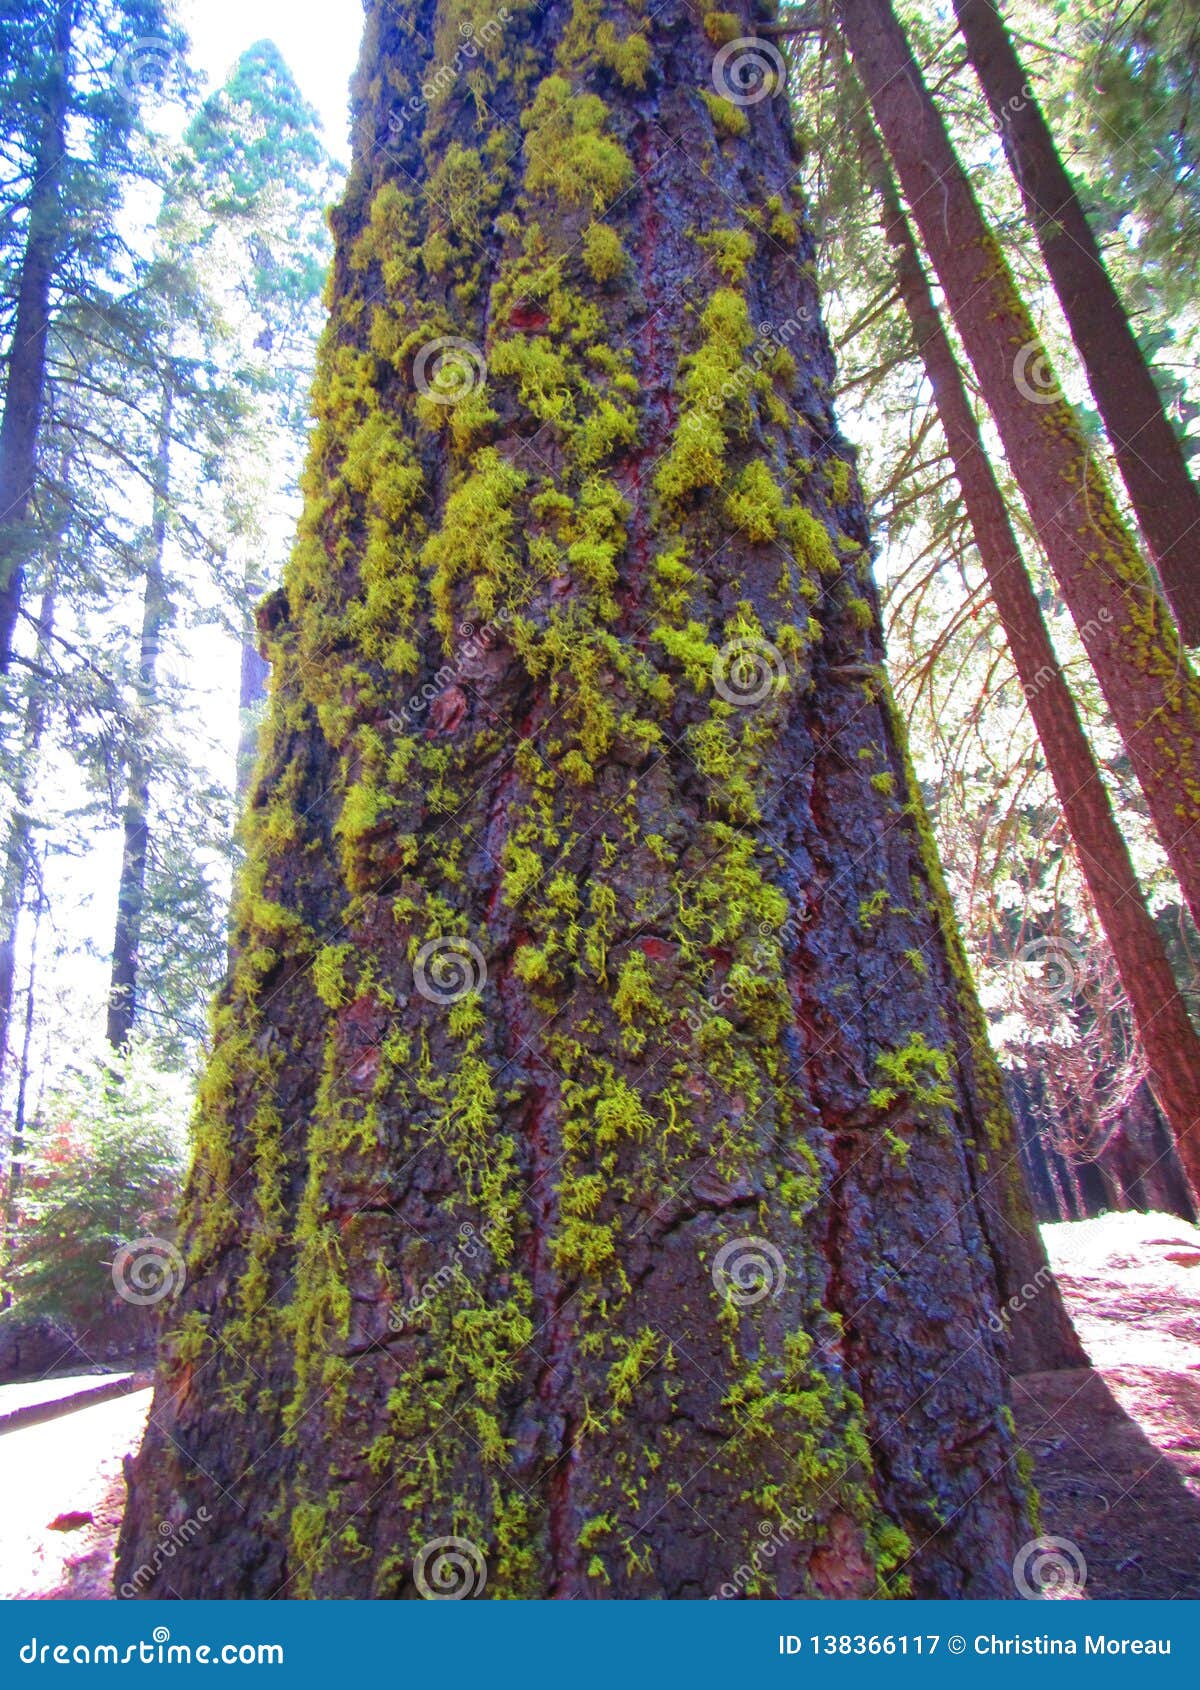 moss growing on trunk of giant sequoia sequoiadendron giganteum along the trail of a hundred giants sequoia national forest